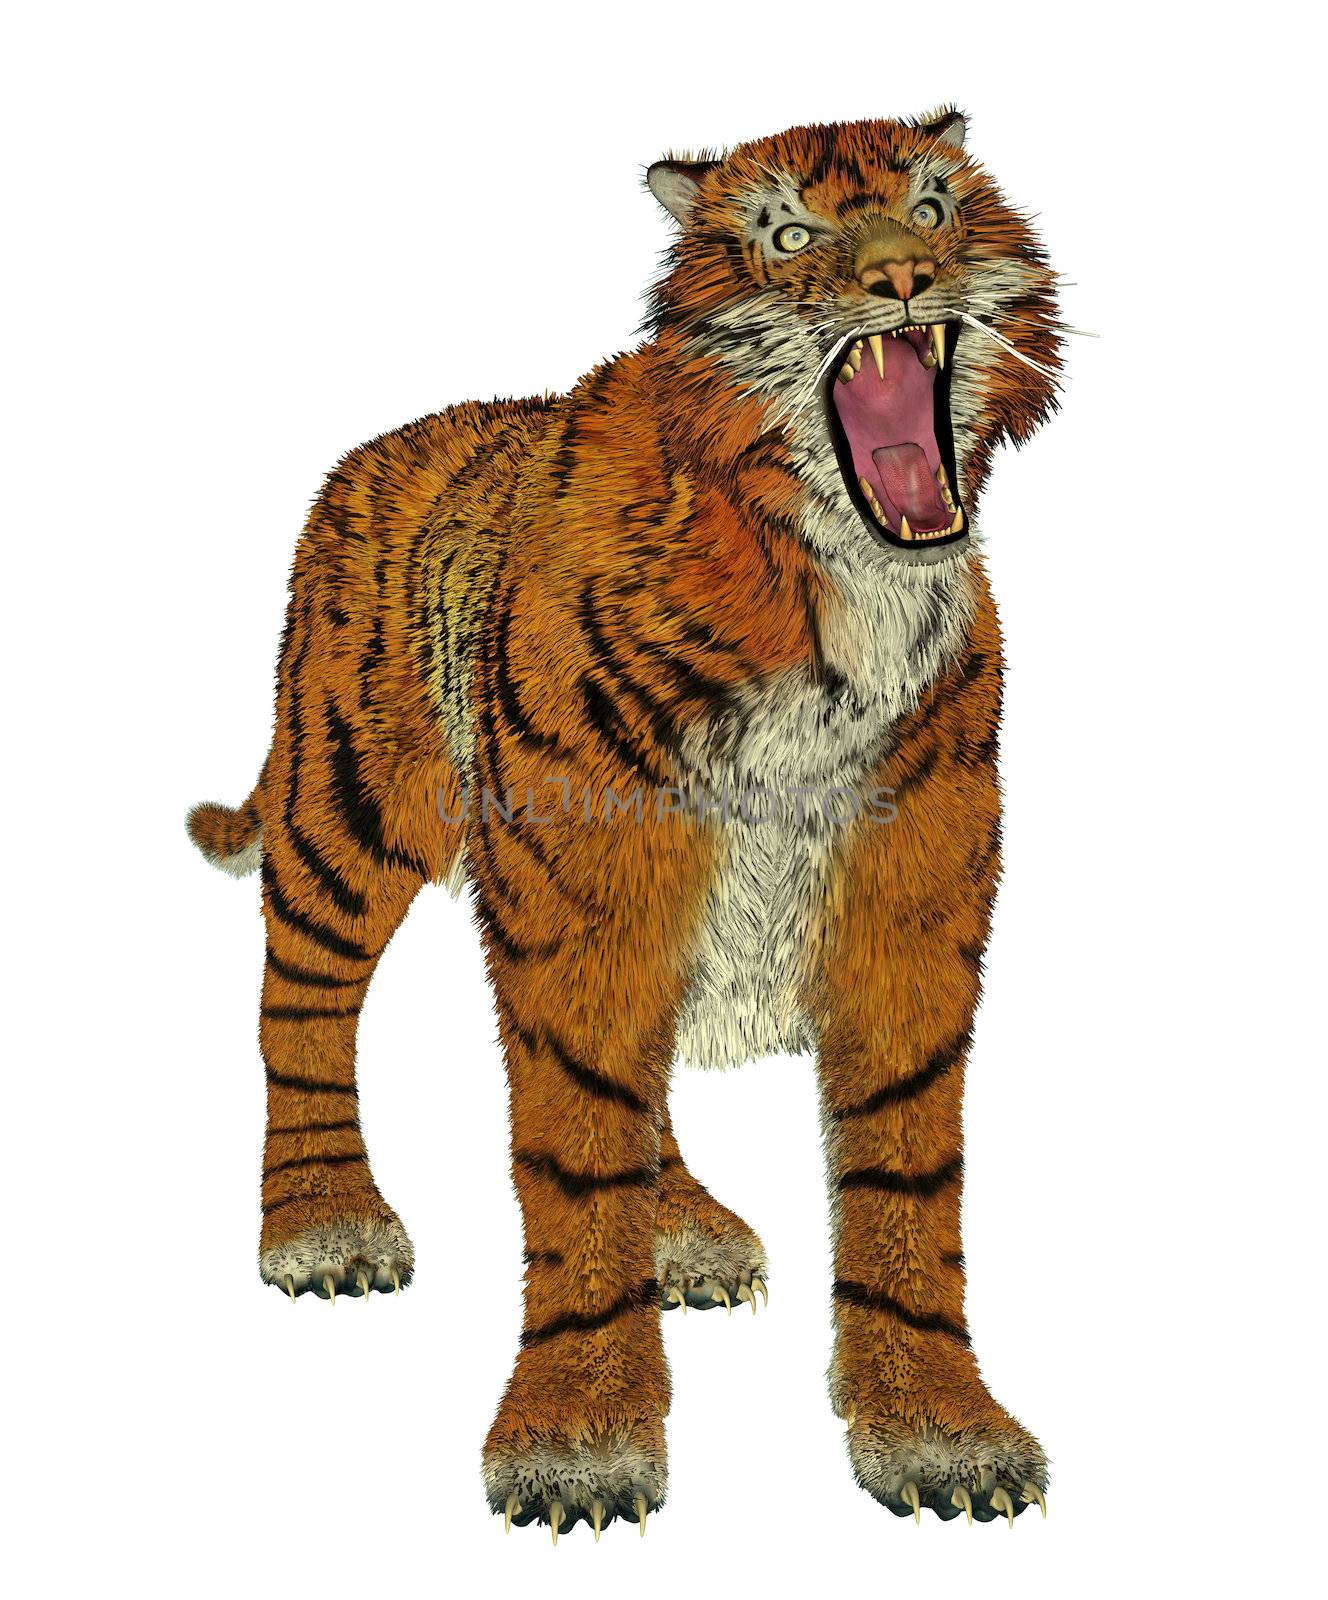 Big beautiful tiger bullying in white background